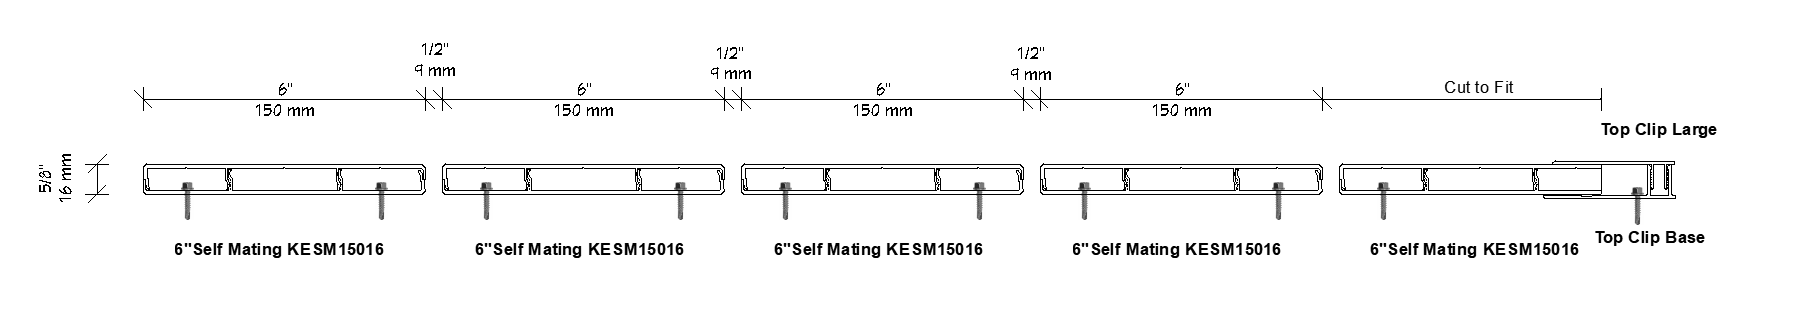 Self Mating Decking Assembly